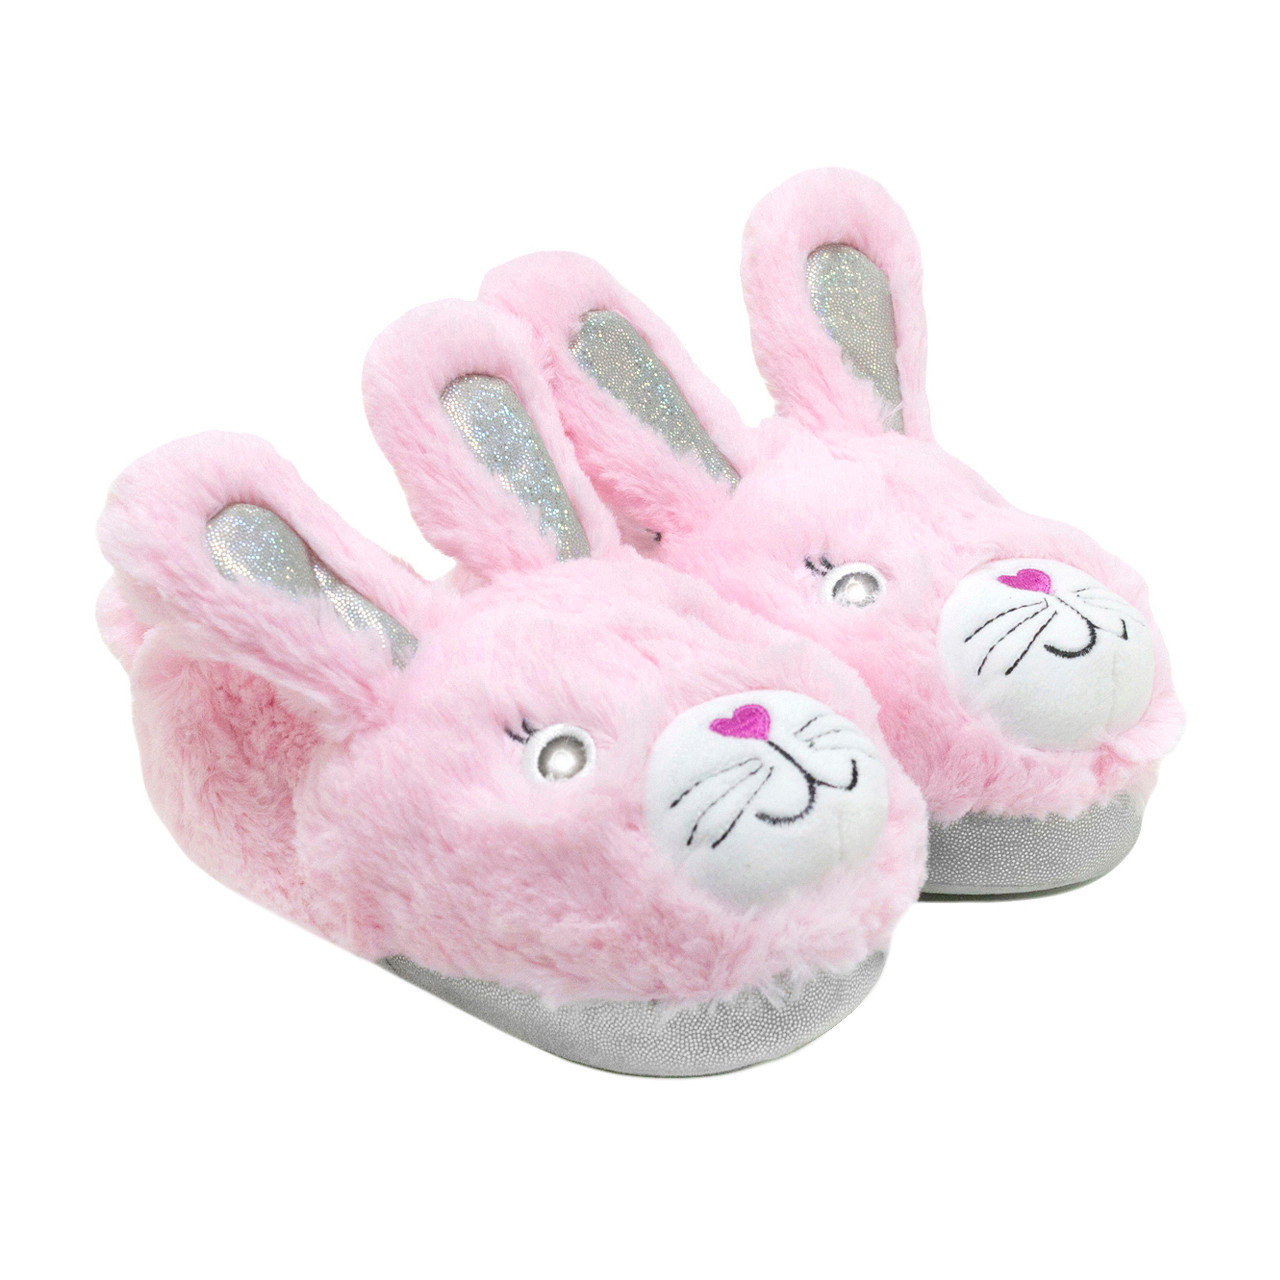 Elisa Slippers | Girls Baby Shoes |